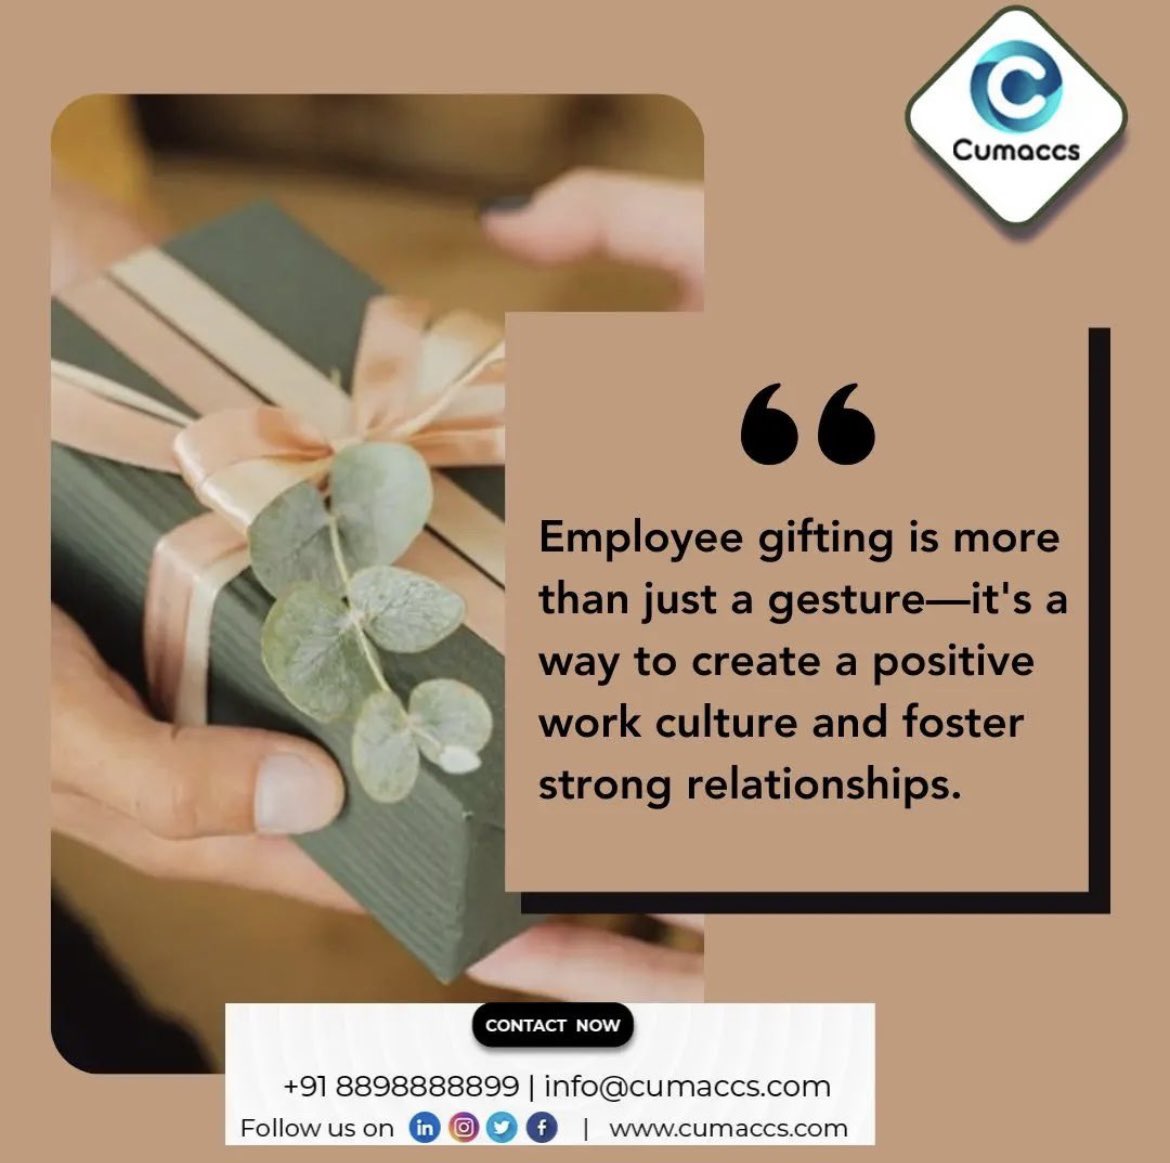 Employee gifting goes beyond a simple gesture; it's a powerful tool to cultivate a positive work #culture and build strong relationships.

Embrace the power of #appreciation and watch your team thrive!

For corporate orders:
Mail us at: info@cumaccs.com
#EmployeeGifting #Positive